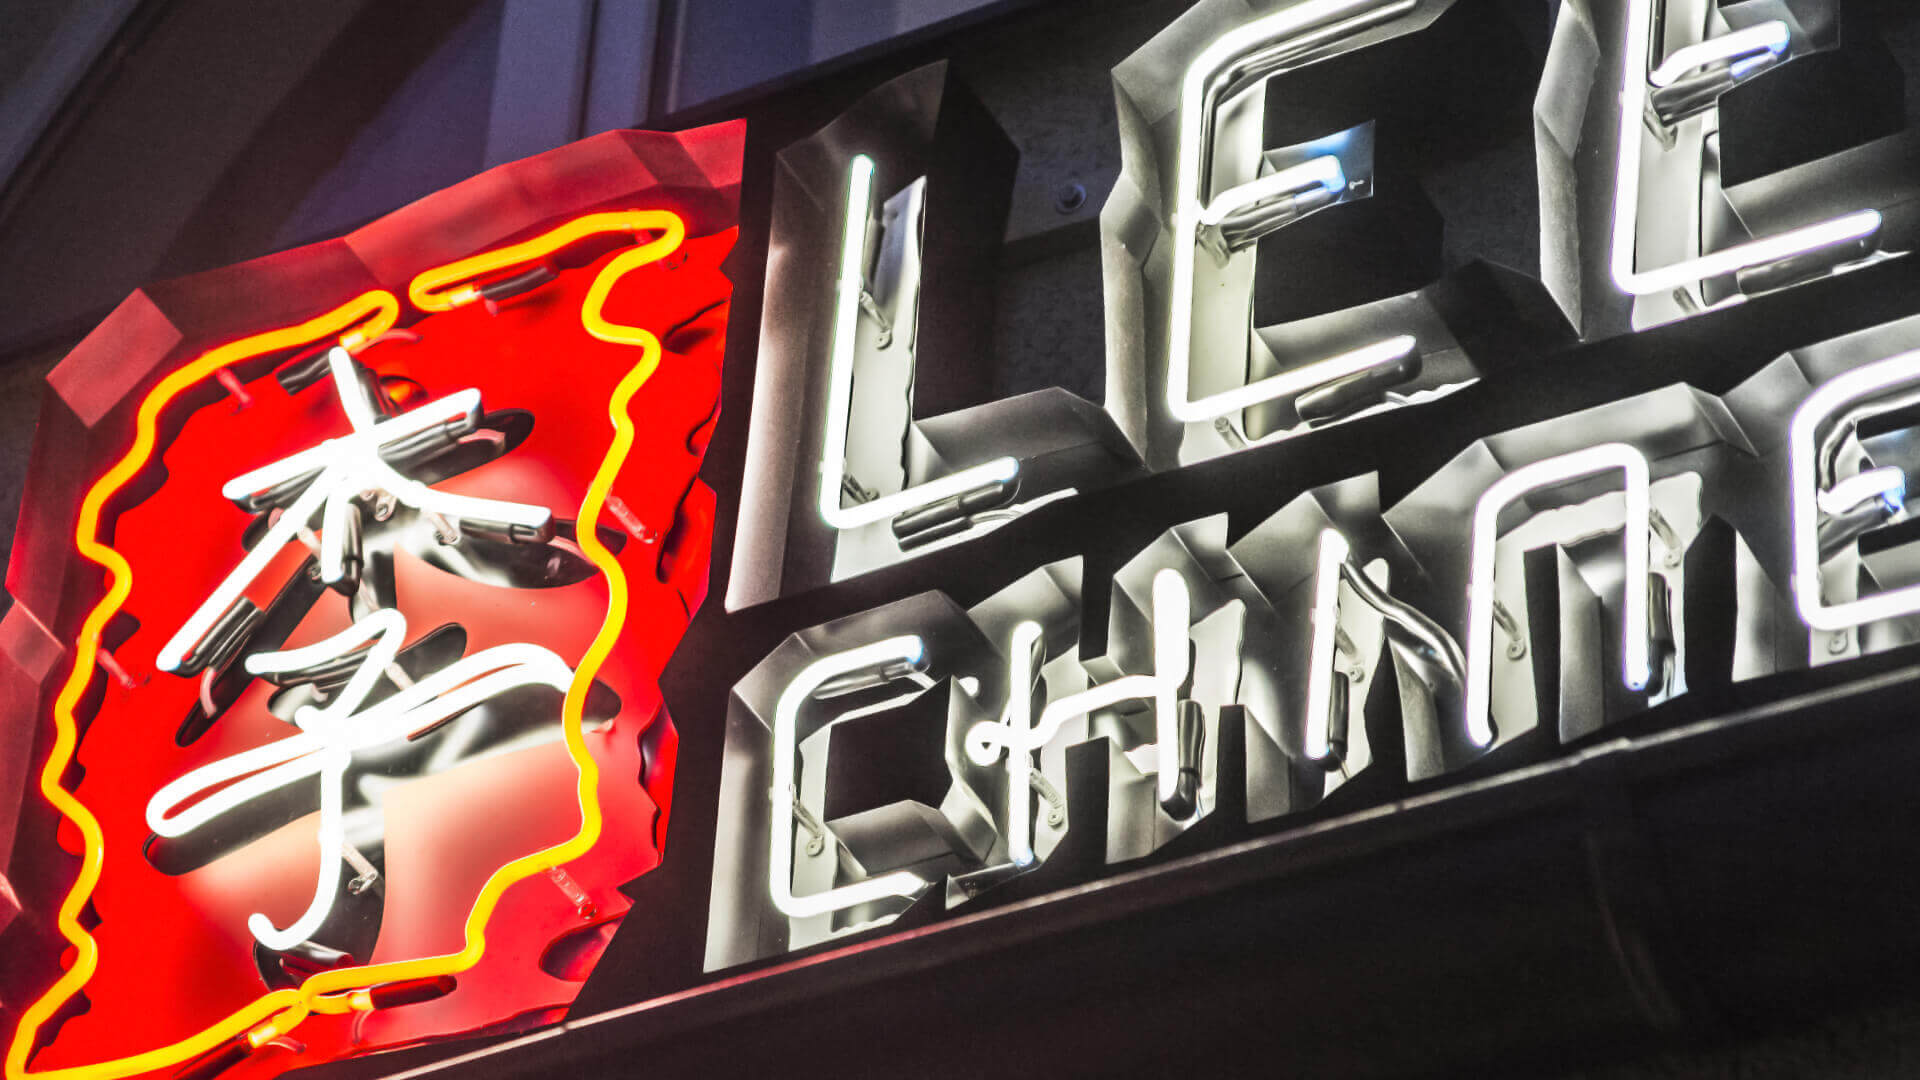 Lees Chines - neon-lees-chinese-neon-above-entry-to-the-restaurant-neon-on-the-wall-neon-on-the-outs-neon-in-melate-rusting-logo-sign-chinese-letter-signs-neon-lites-illuminated-china-restuarant-gdansk